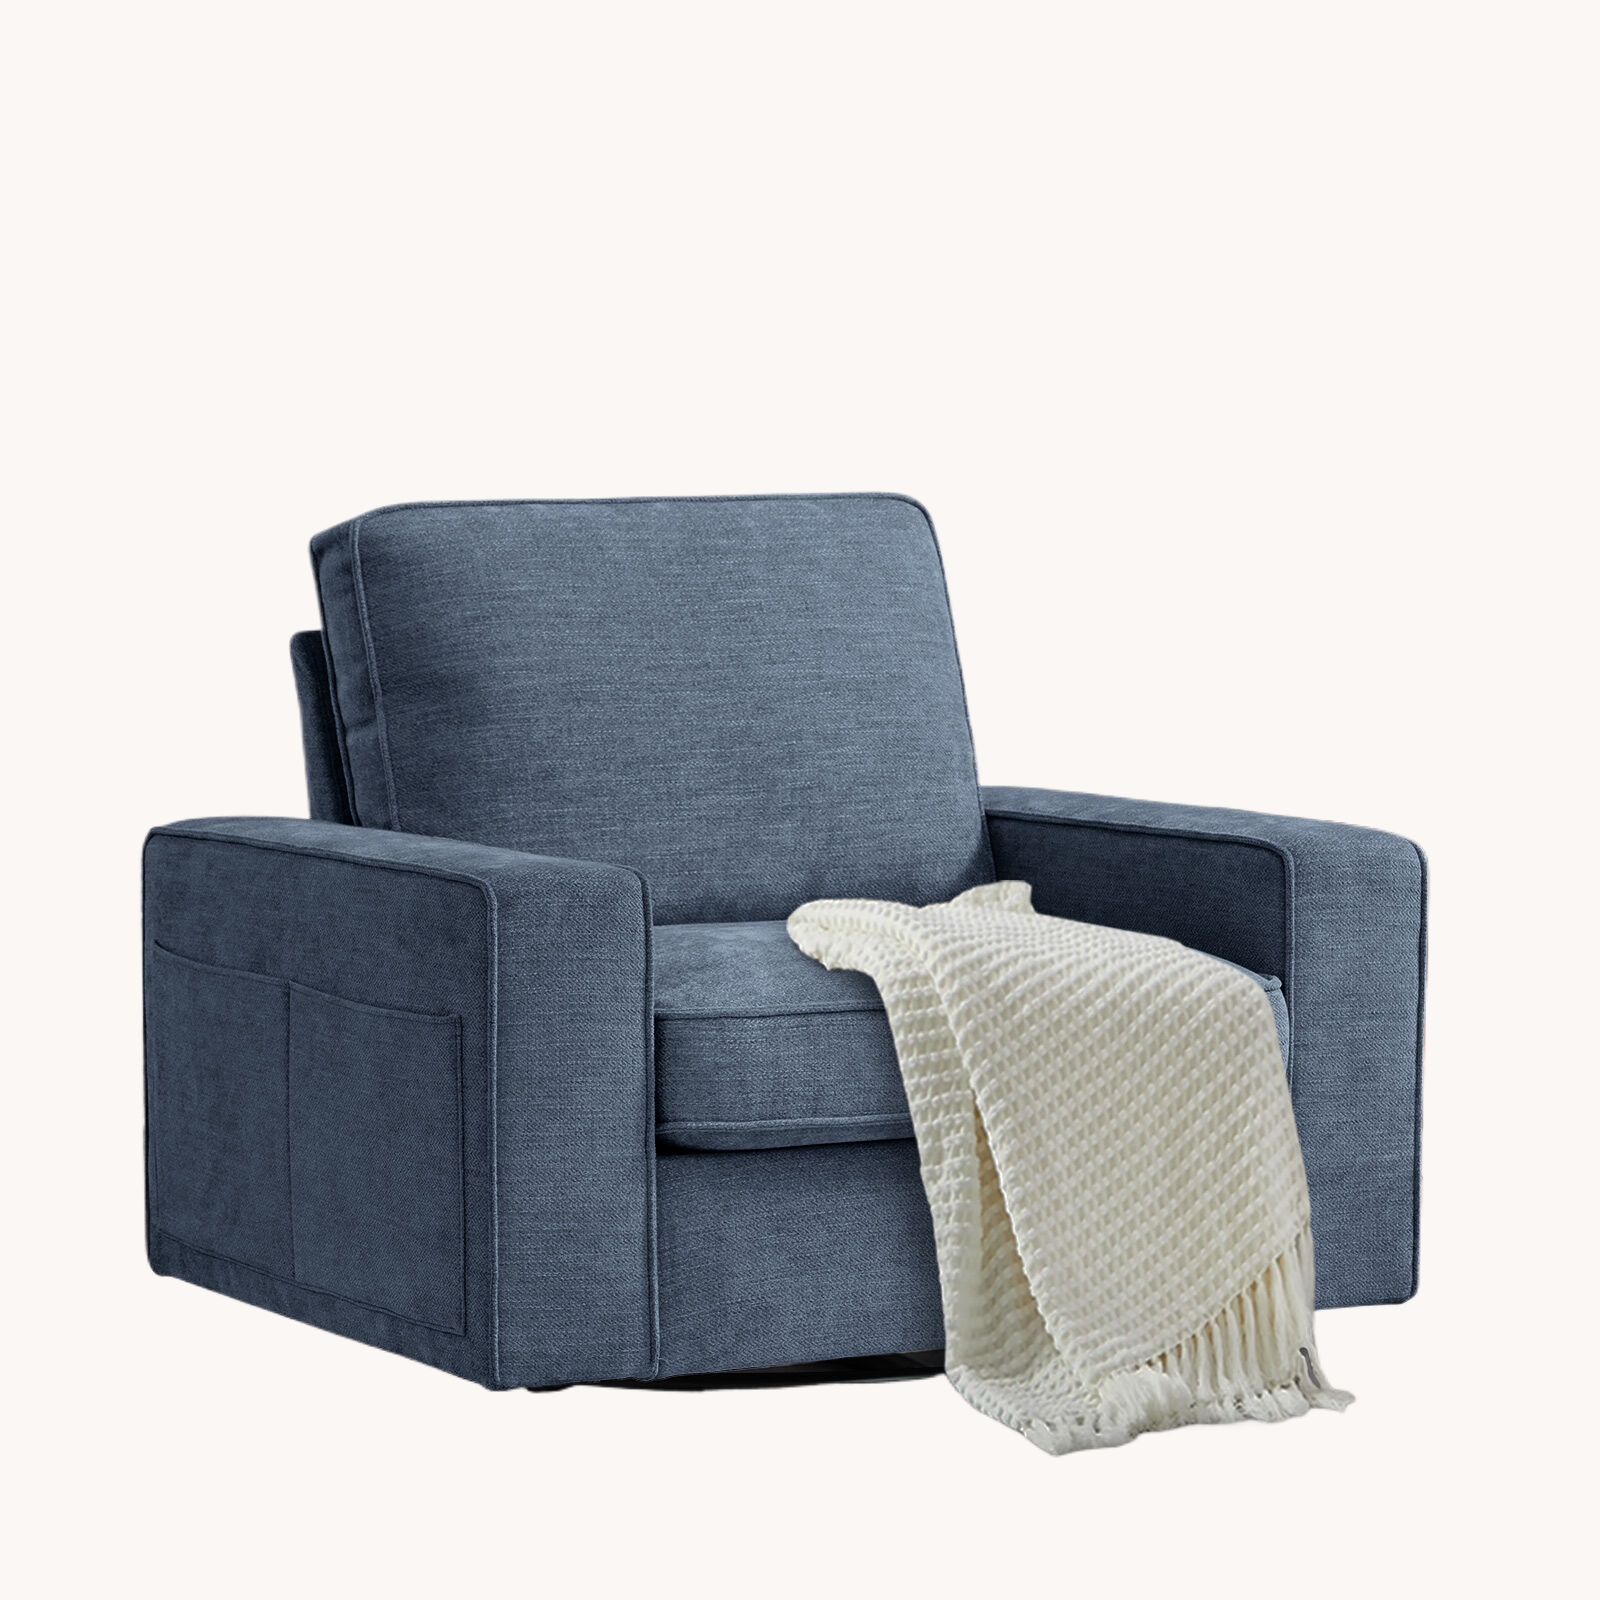 Coosleephome Swivel Accent Chair Armchair for Living Room